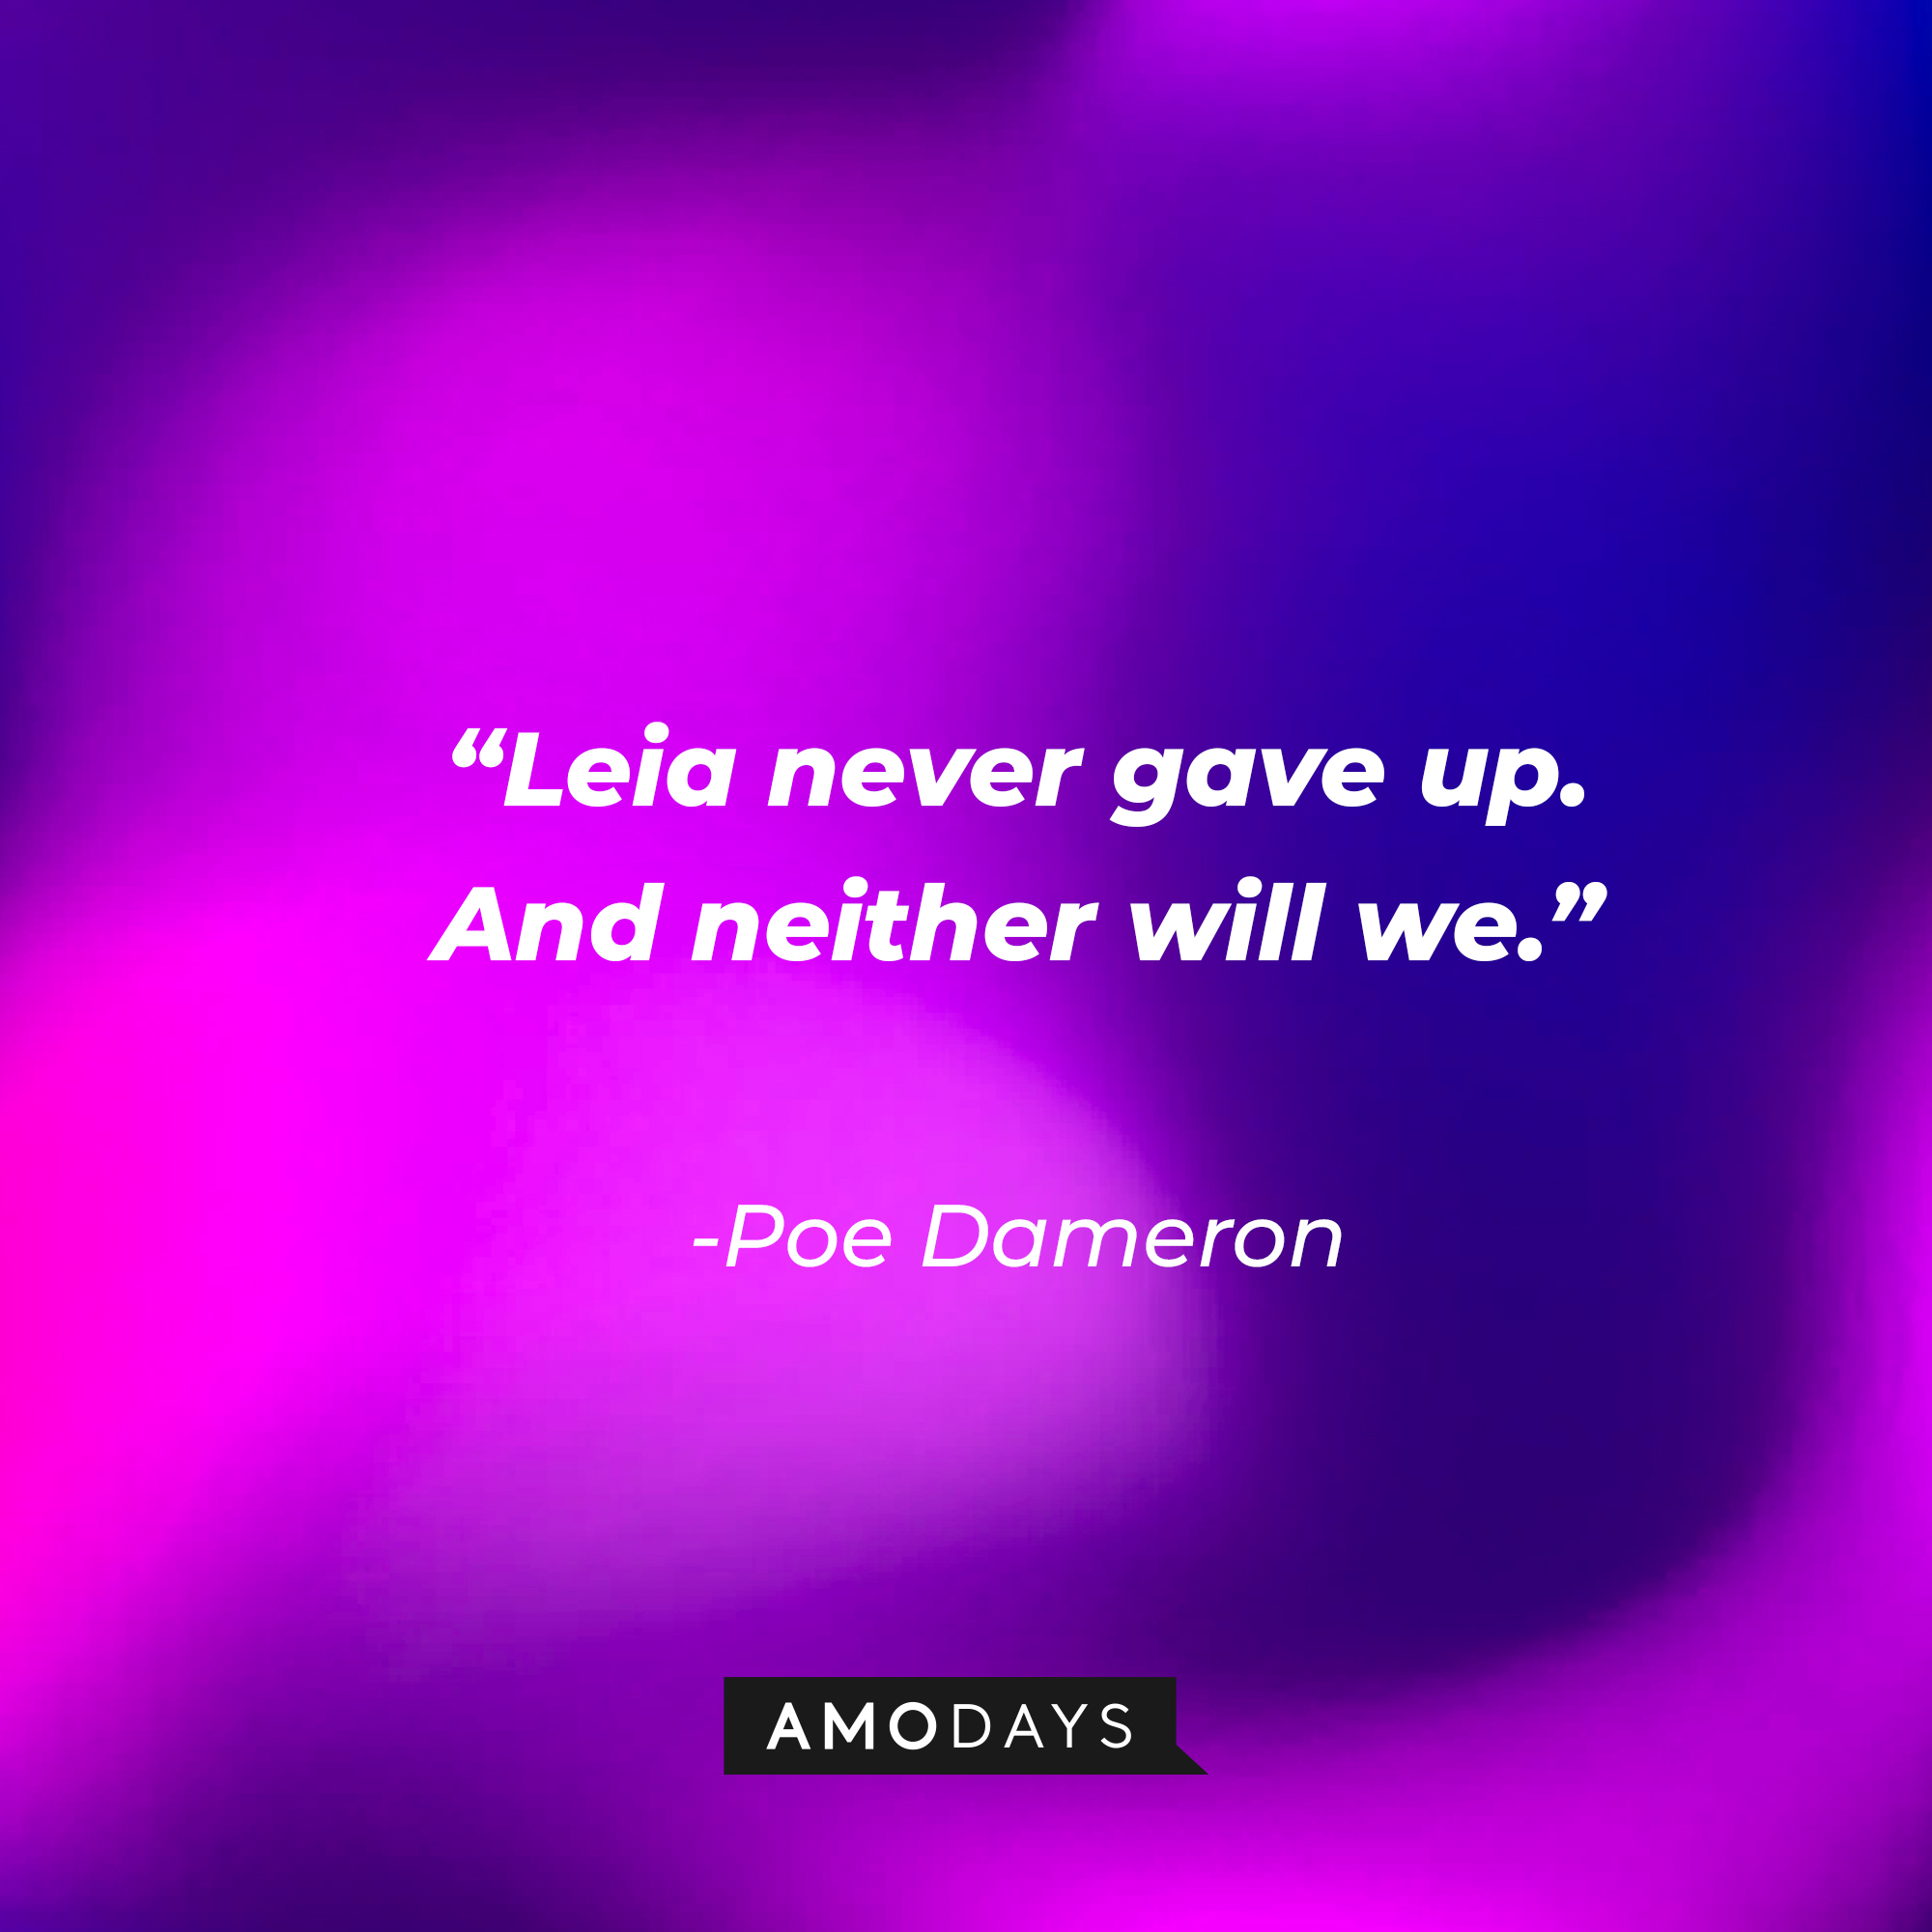 Poe Dameron’s quote: “Leia never gave up. And neither will we.” | Source: AmoDays